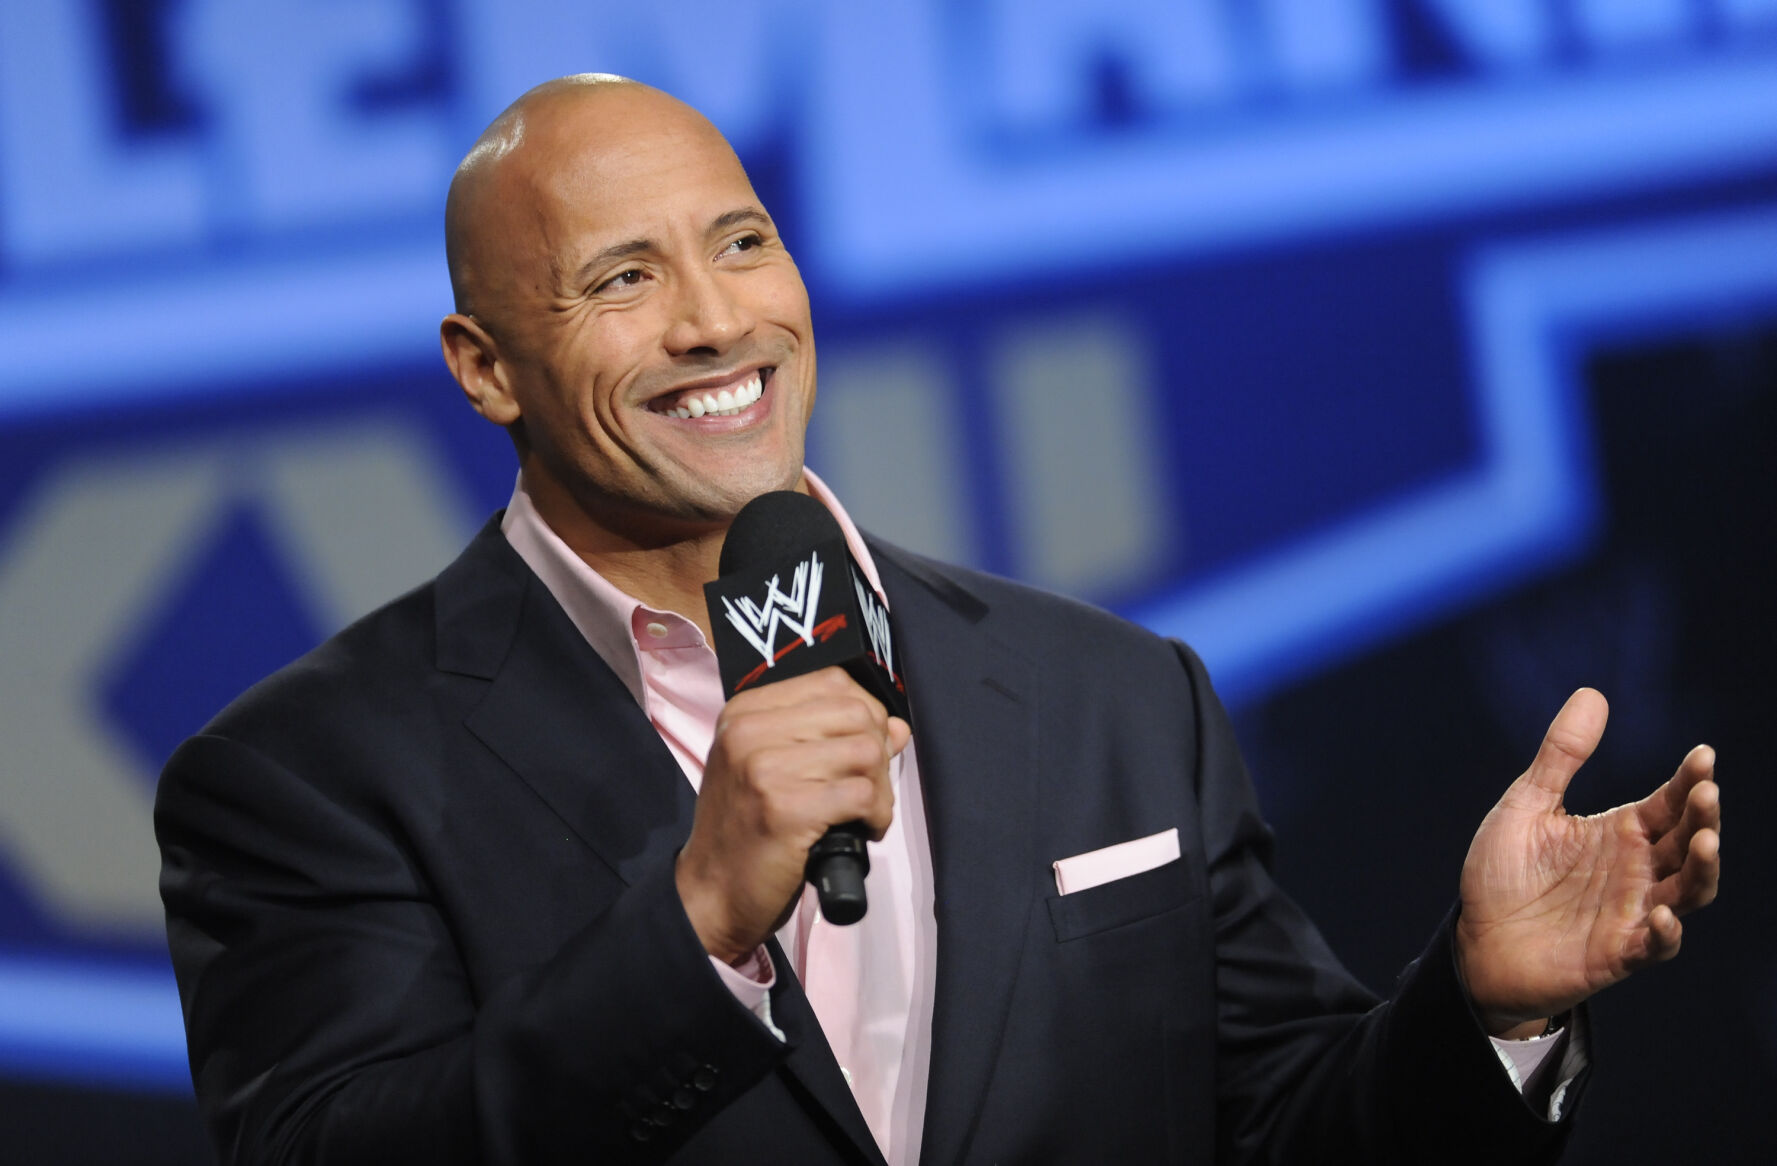 <p>FILE - Actor and former WWE Superstar Dwayne "The Rock" Johnson participates in a Wrestlemania XXVII press conference at the Hard Rock Cafe in Times Square on Wednesday, Mar. 30, 2011 in New York. It is a name that has become almost synonymous with professional wrestling but its bearer, Dwayne Johnson, has never legally owned “The Rock.” That will change under a new agreement with the WWE under whichJohnson will also join the board of TKO Group, the sports and entertainment company that houses WWE and UFC.(AP Photo/Evan Agostini, file)</p>   PHOTO CREDIT: Evan Agostini 